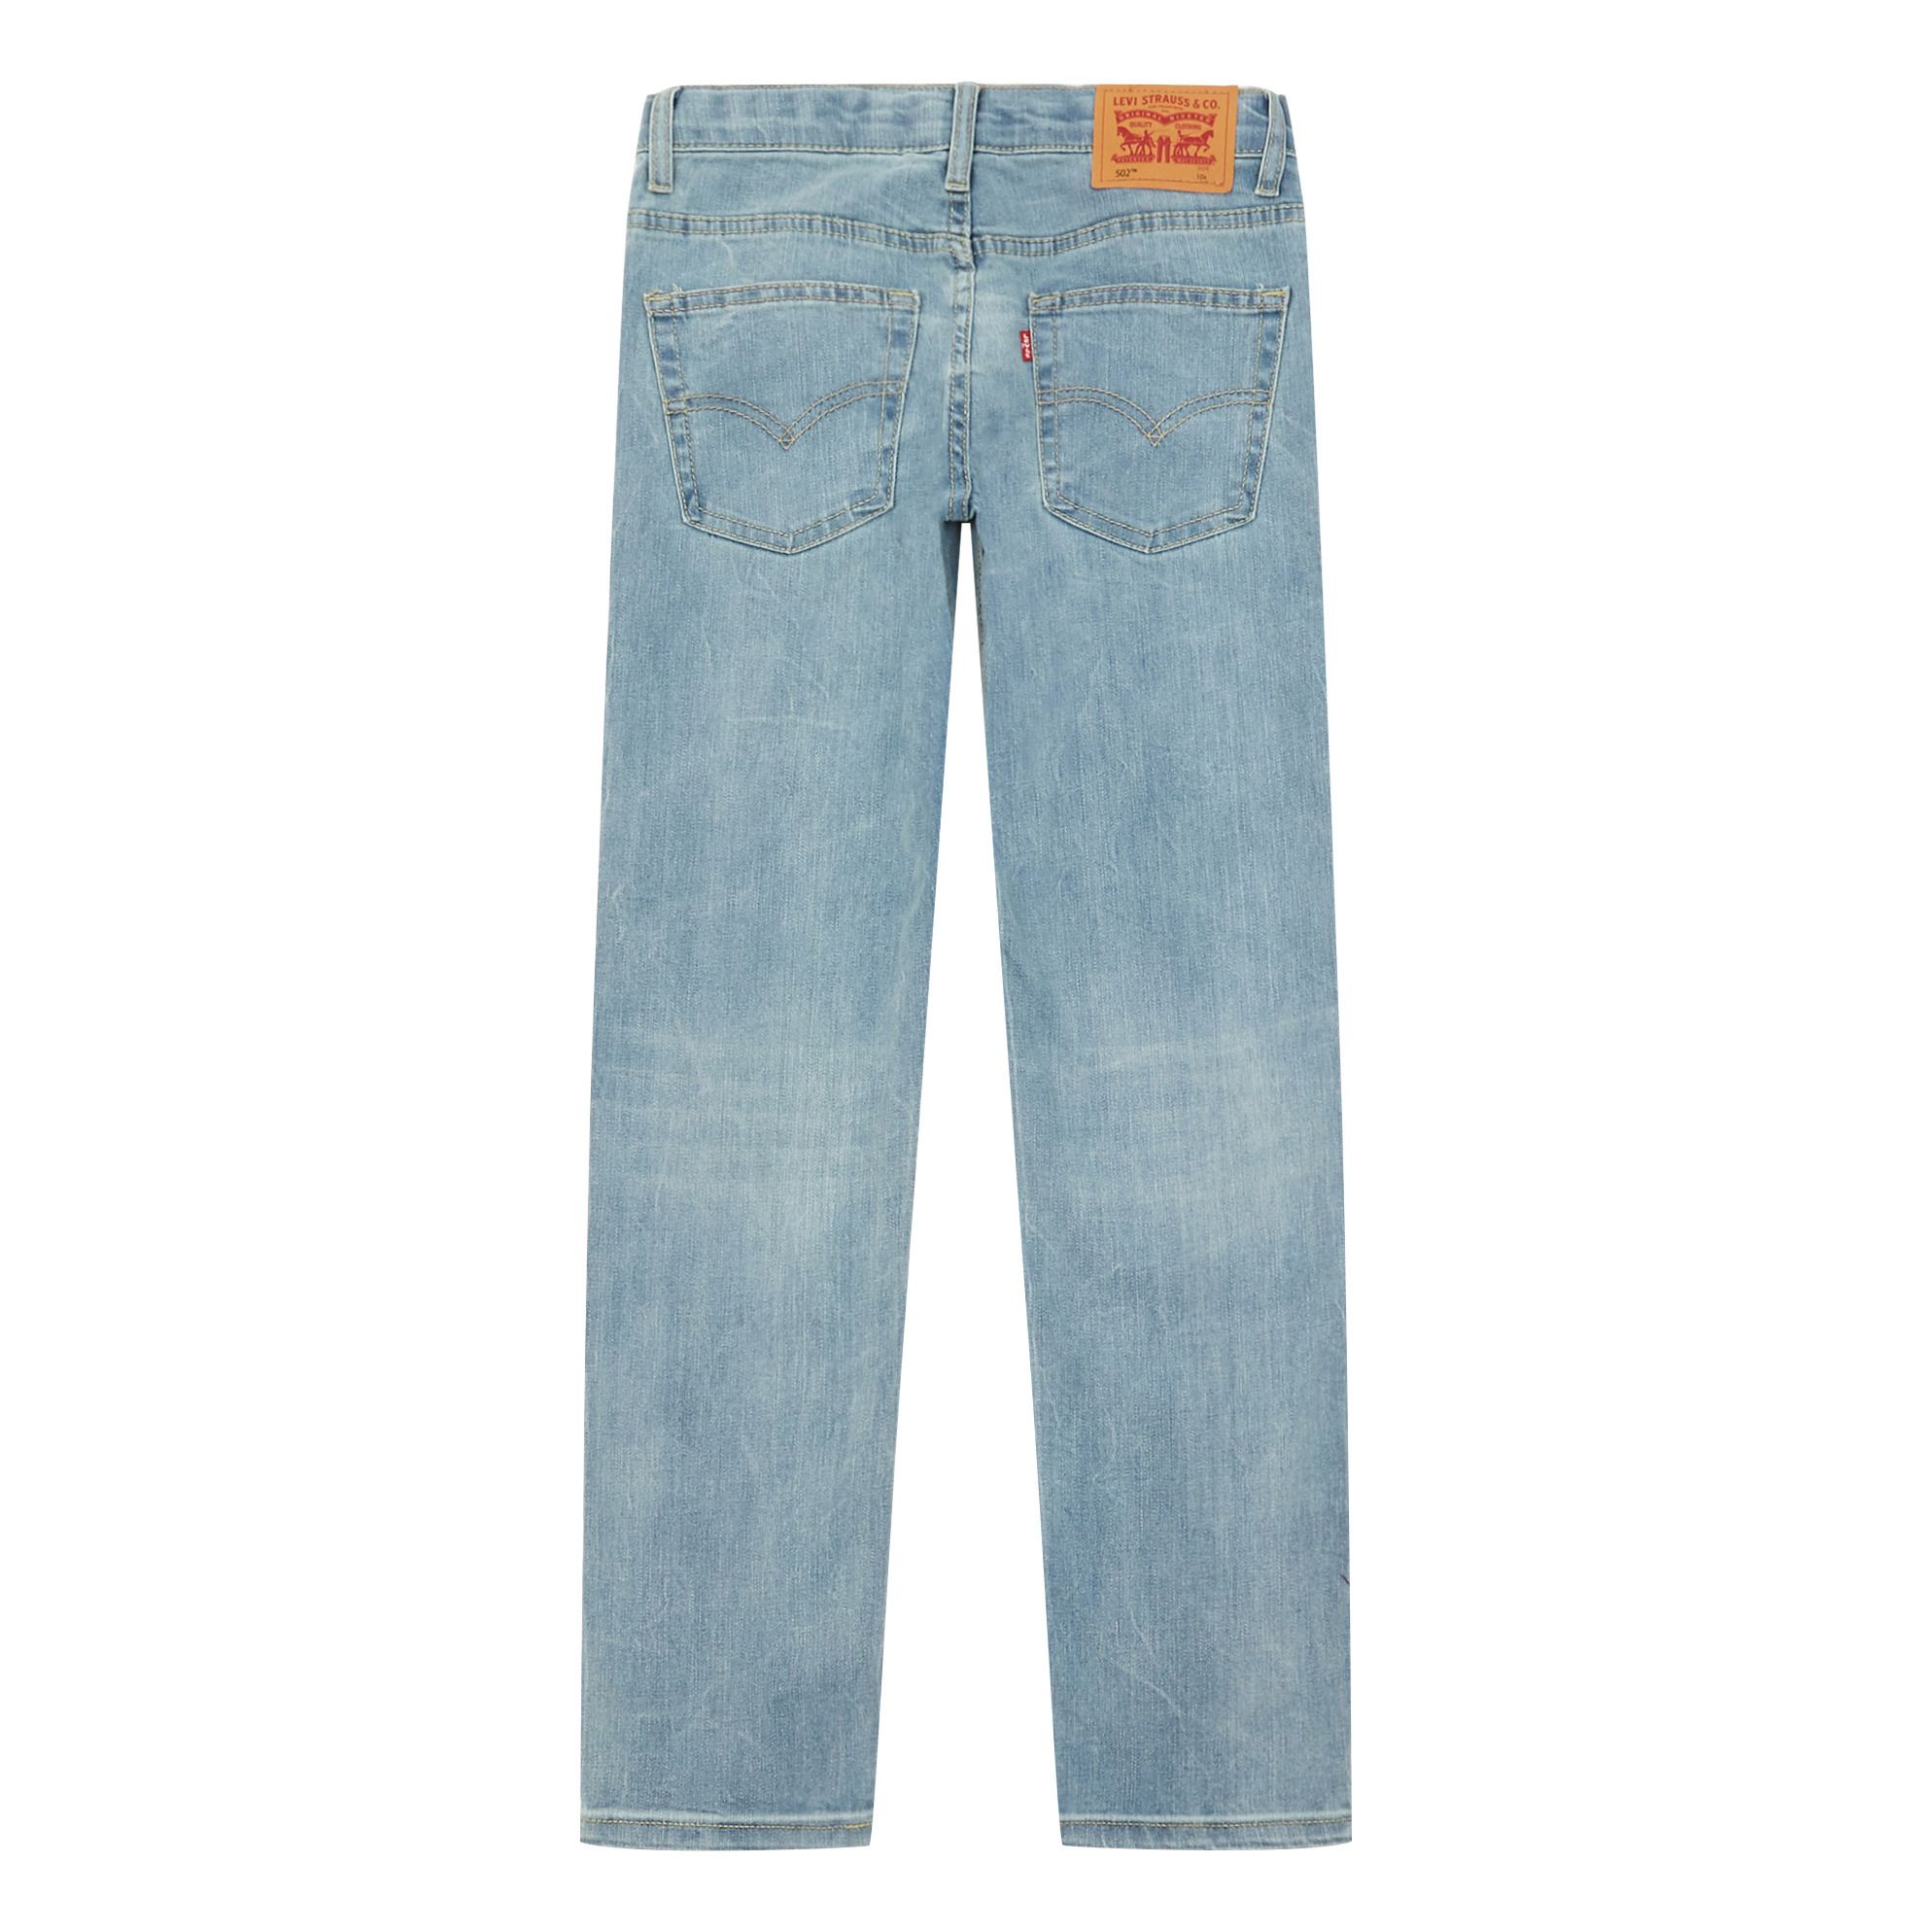 Levi's - 502 tapered vintage jeans - Grey | Smallable